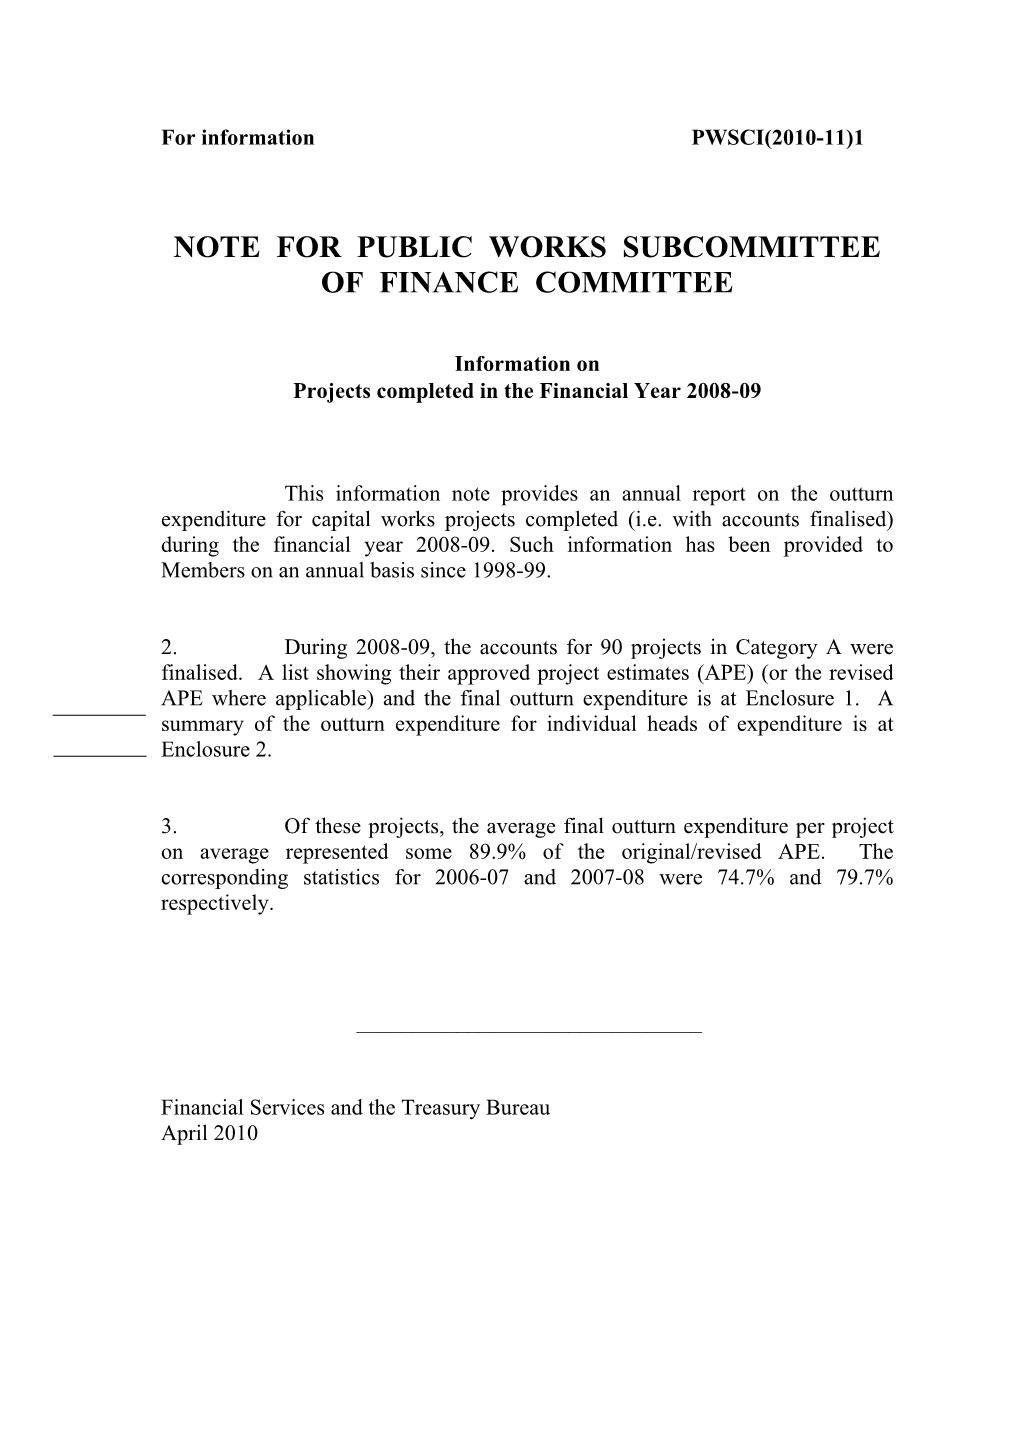 Note for Public Works Subcommittee of Finance Committee